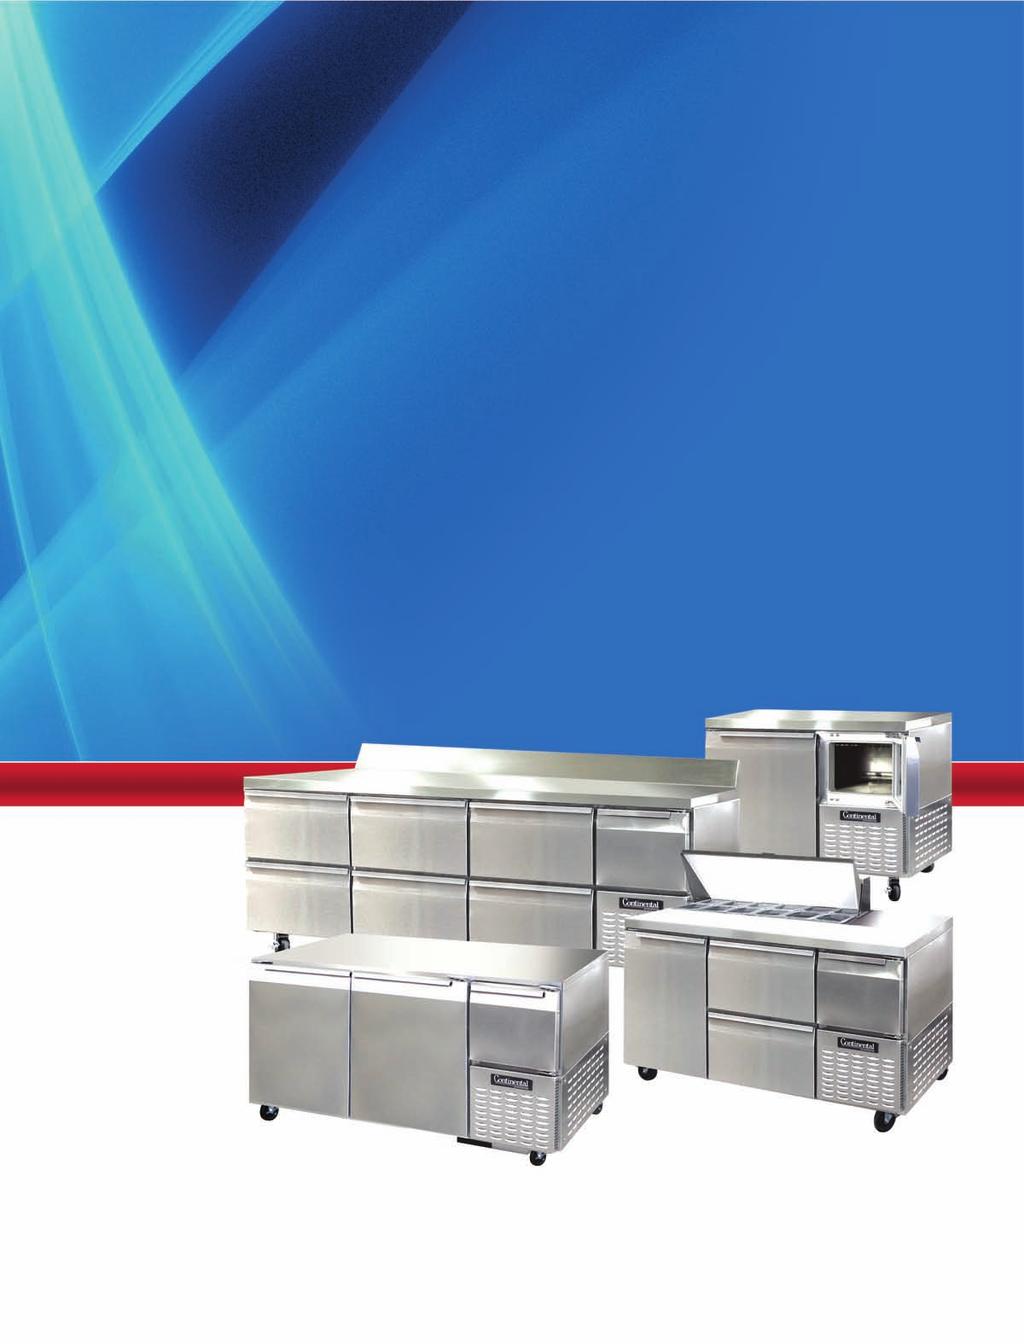 INNOVATIVE DESIGNS FOR YOUR FOODSERVICE NEEDS For